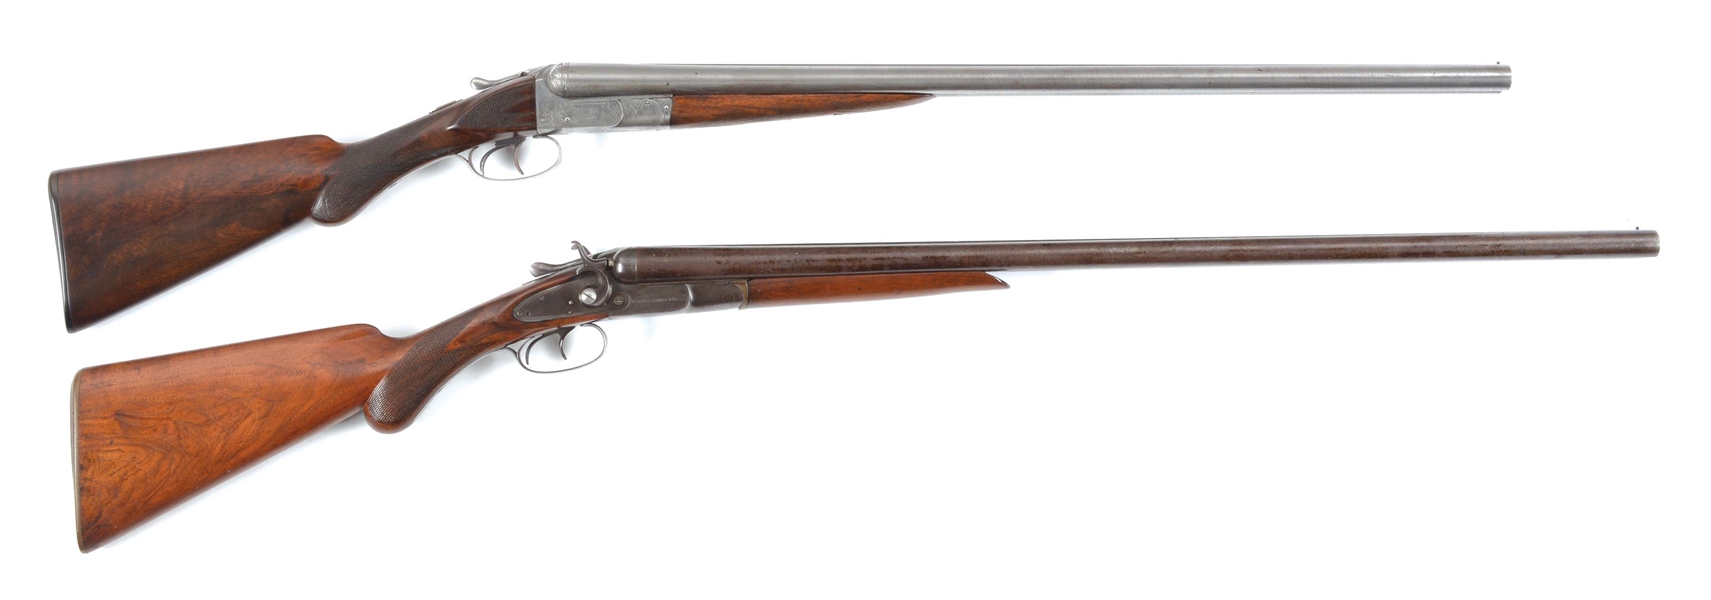 (A) LOT OF 2 WILKES BARRE SIDE BY SIDE SHOTGUNS.